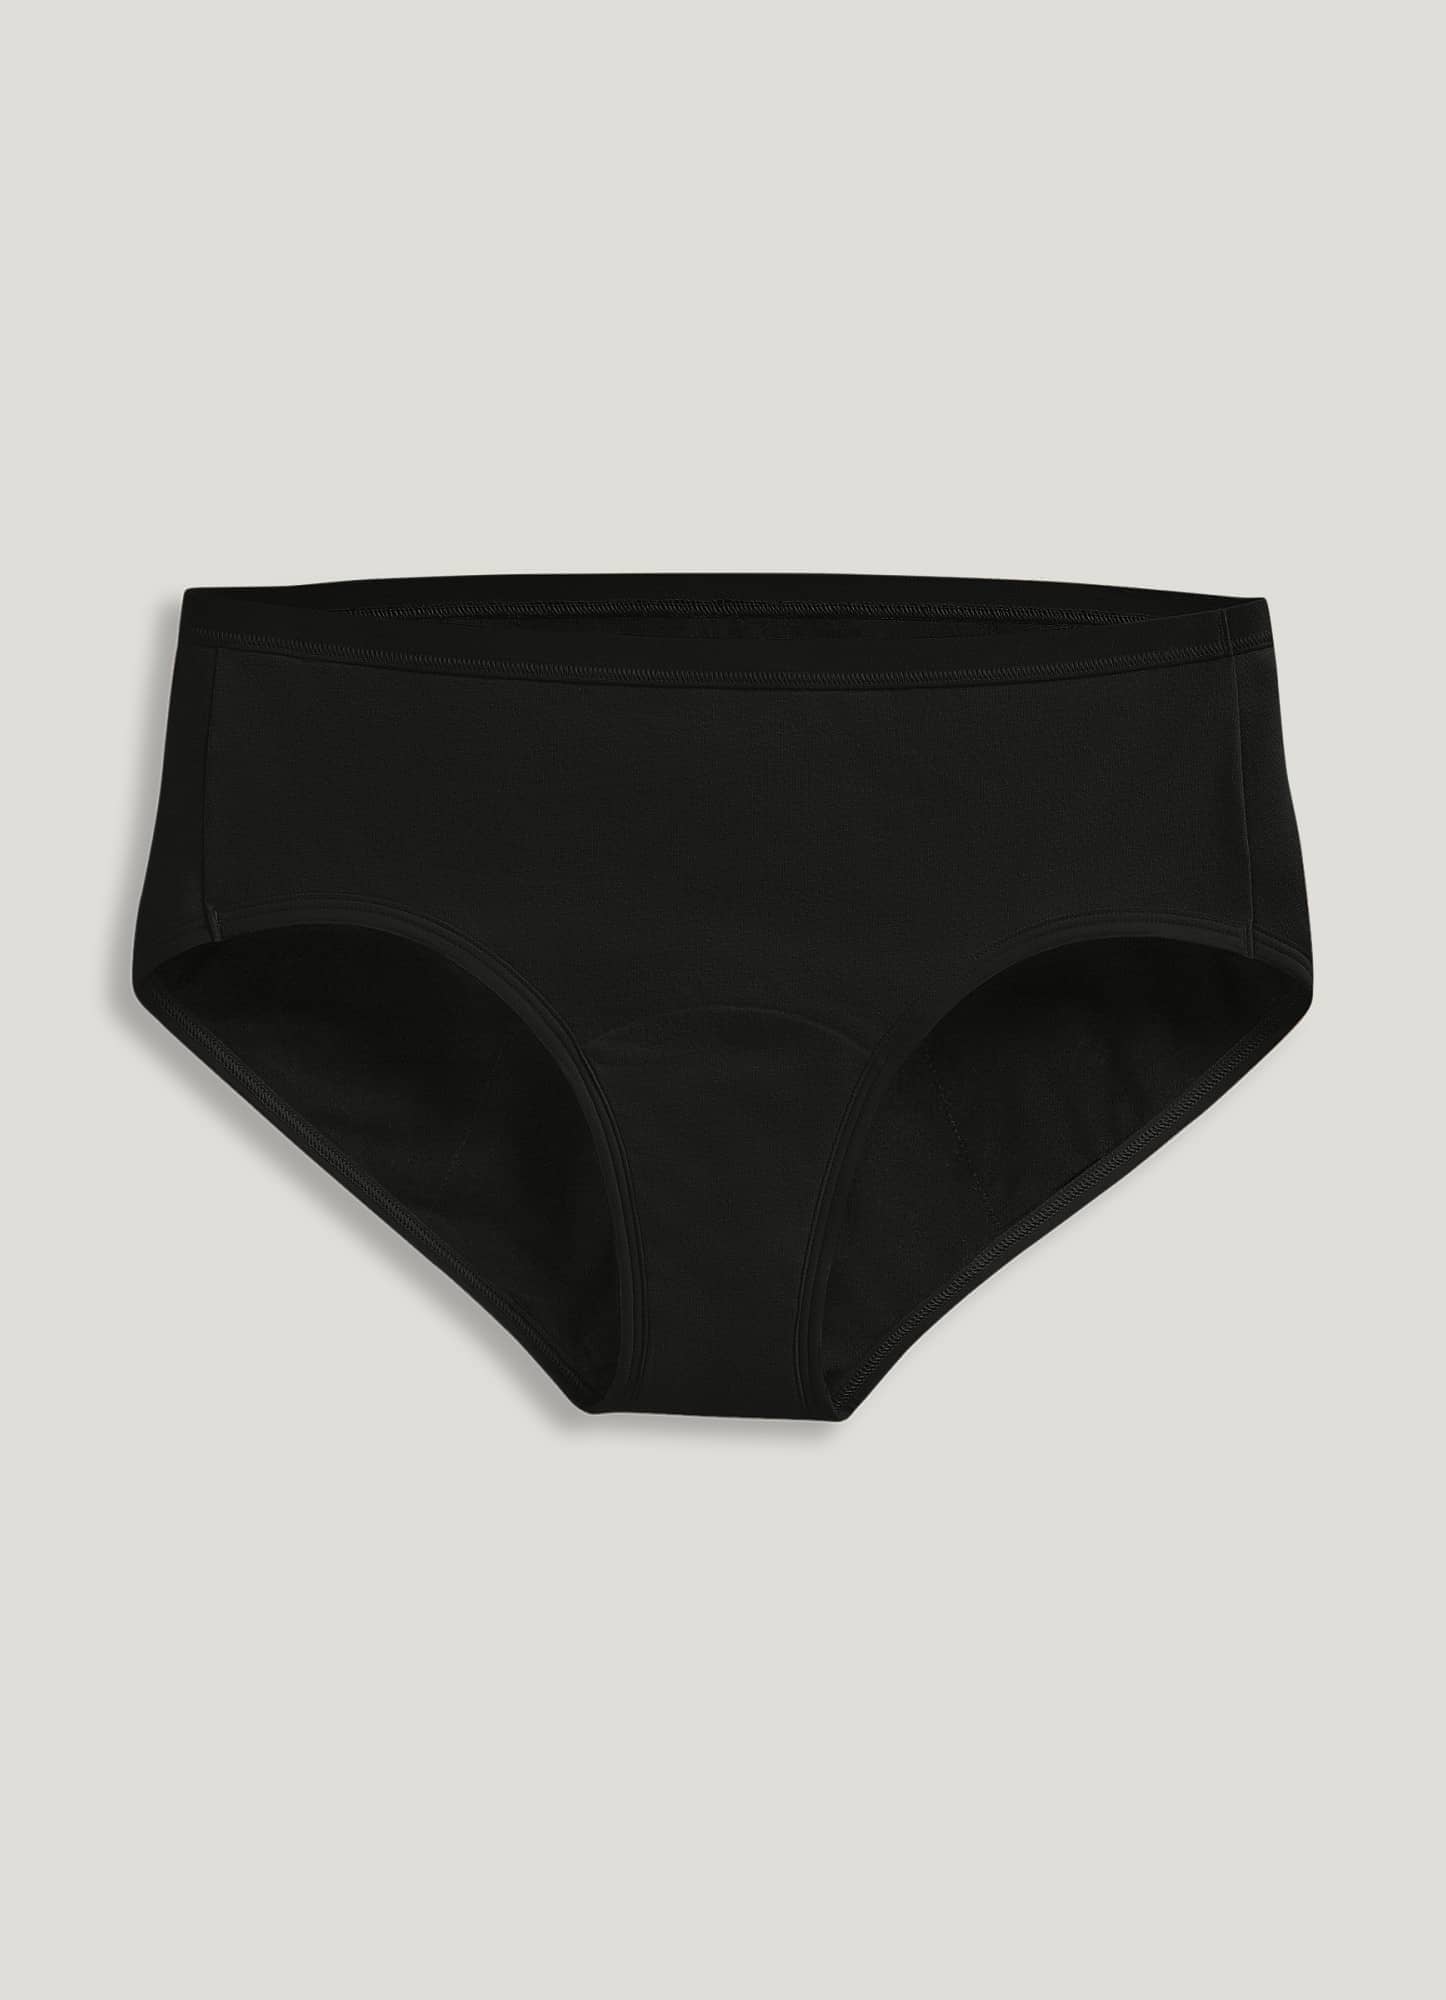 Full coverage panties stretchable cotton, ensuring maximum comfort and  coverage.